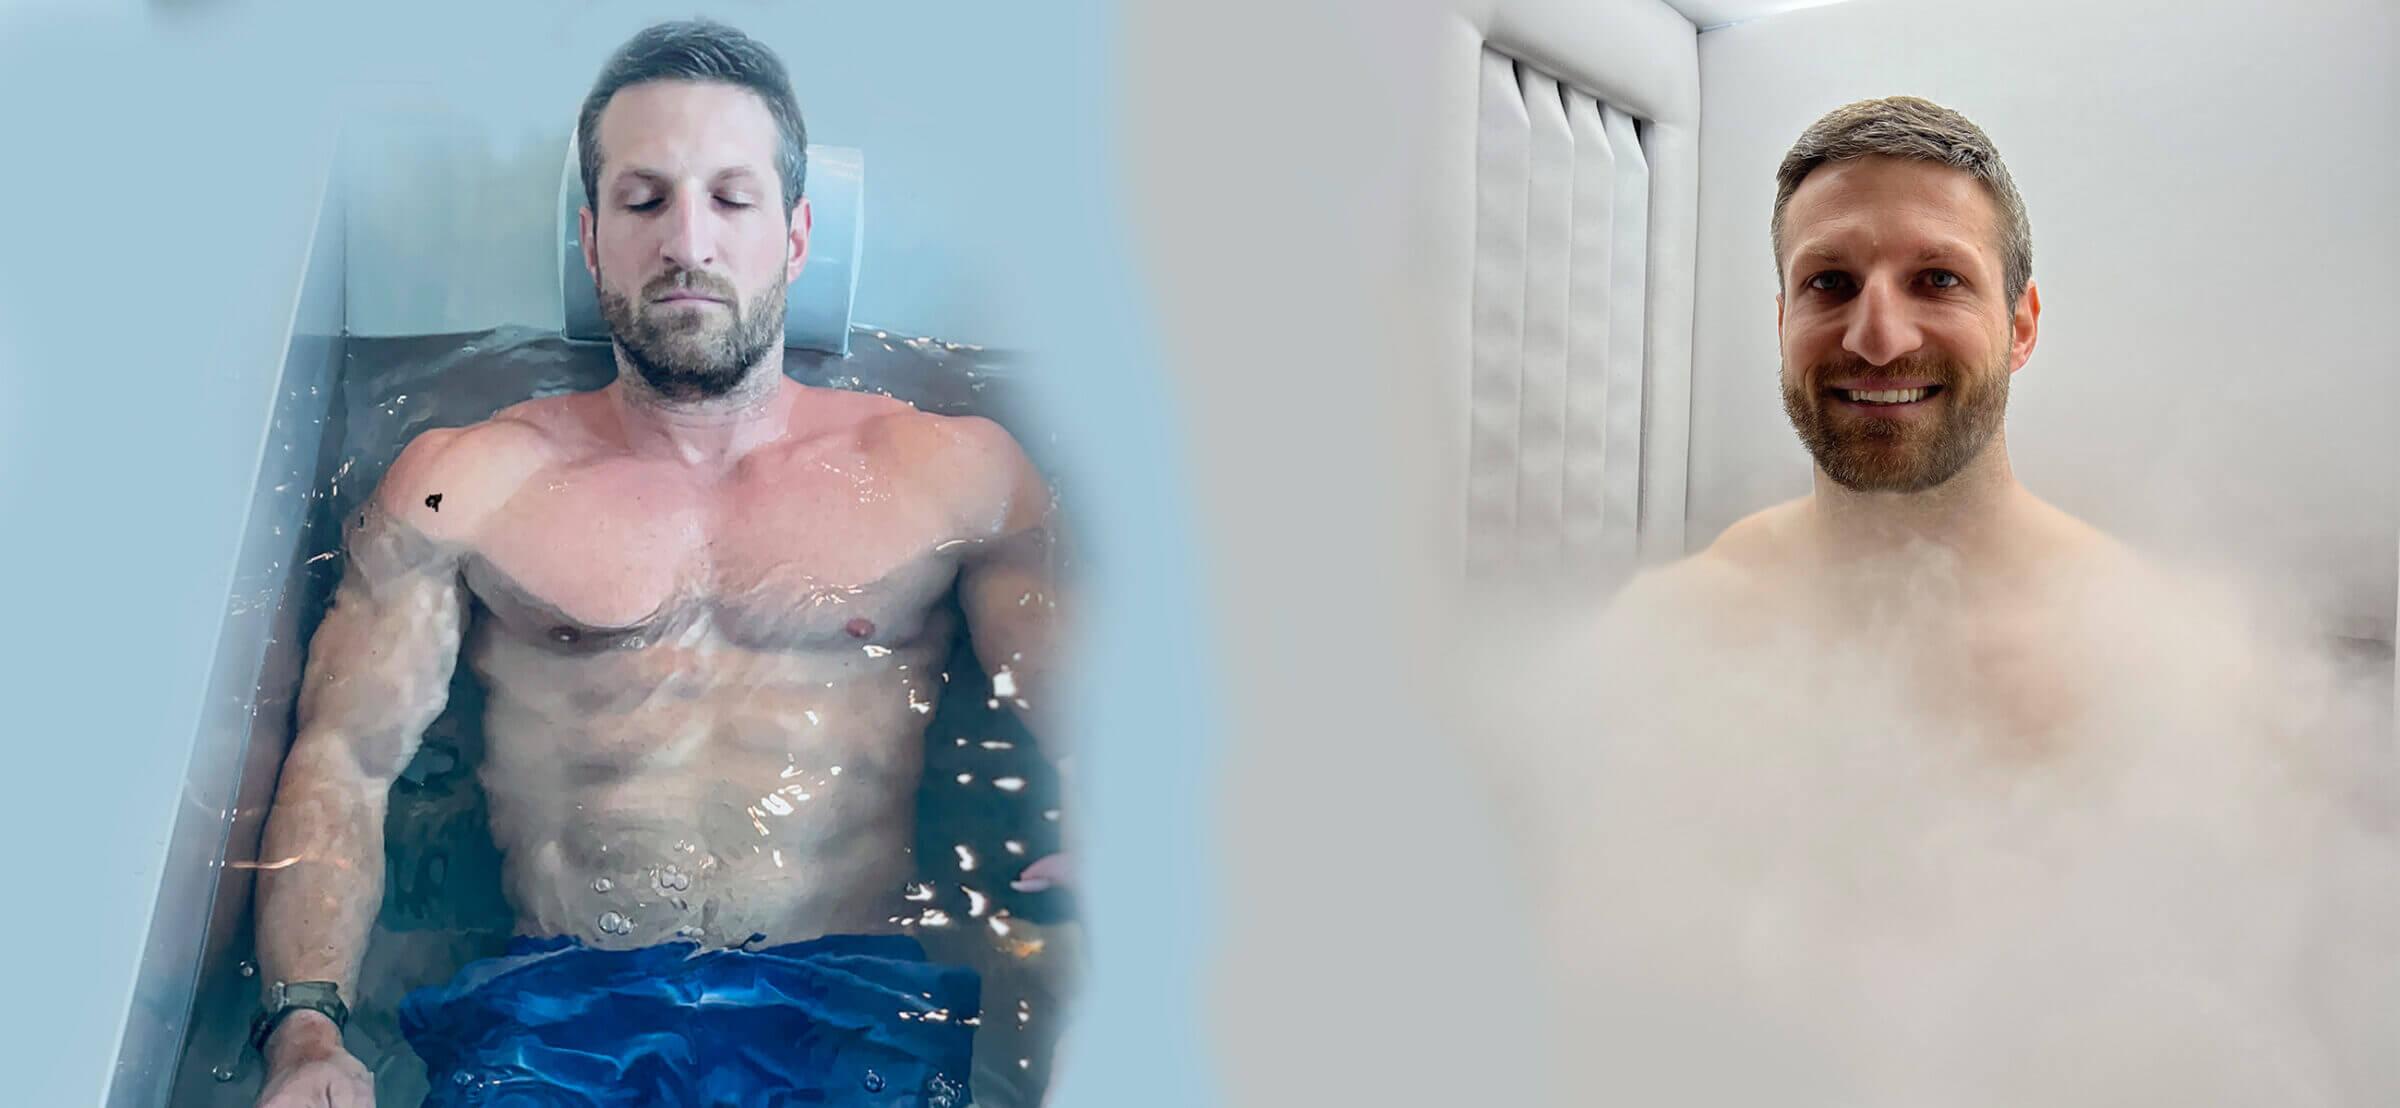 Ice Machine vs Ice Bath Which is more effective for athletes